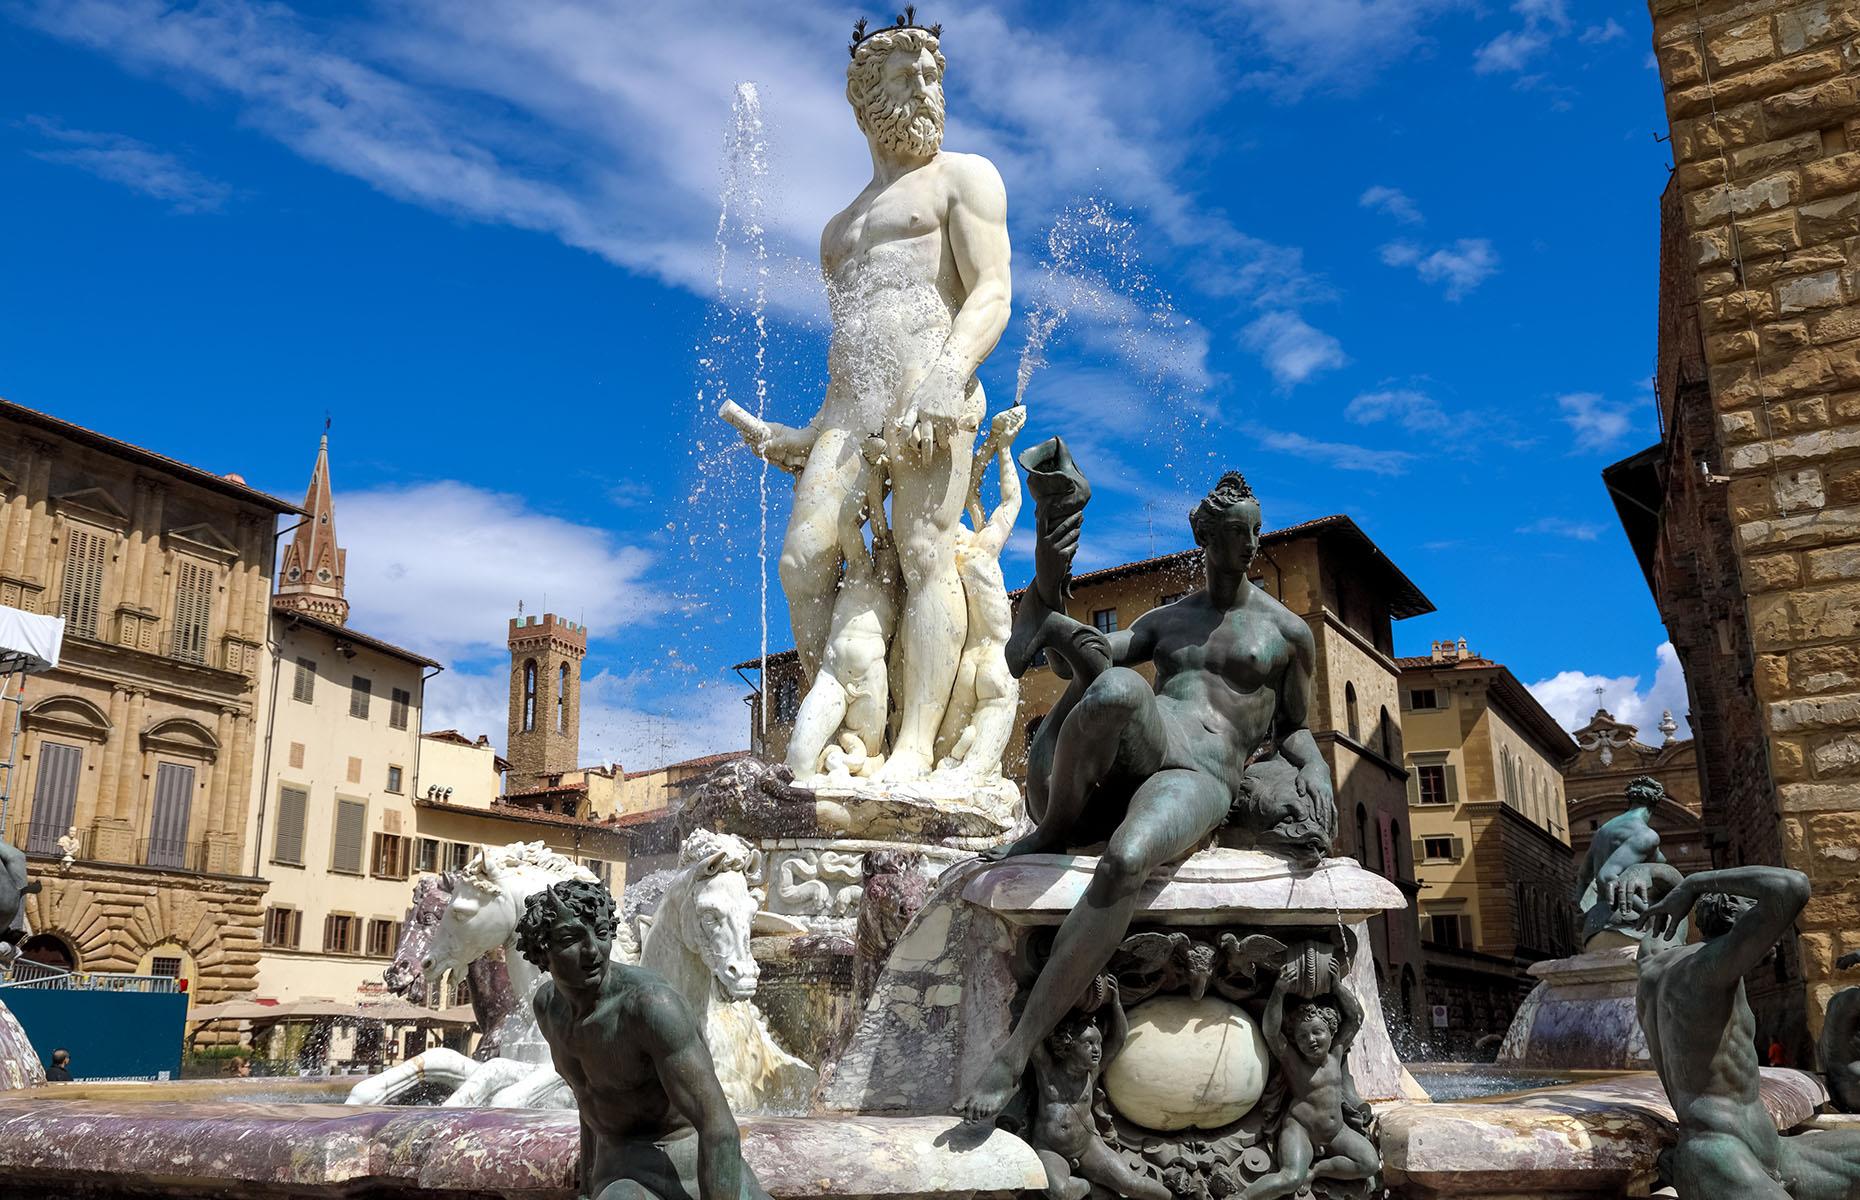 <p>A German tourist caused €5,000 ($5,323) worth of damage to Florence’s famous Fountain of Neptune when he clambered up it to pose for a photo in September 2023, knocking a chunk of marble off the sea god’s chariot and cracking a horse’s hoof in the process. The fountain was created by Bartolomeo Ammannati and was famously described by Michelangelo as a waste of Carrara marble. Regardless, the tourist faces a hefty fine. “There is no justification for vandalism of cultural heritage,” said the Mayor of Florence, Dario Nardella.</p>